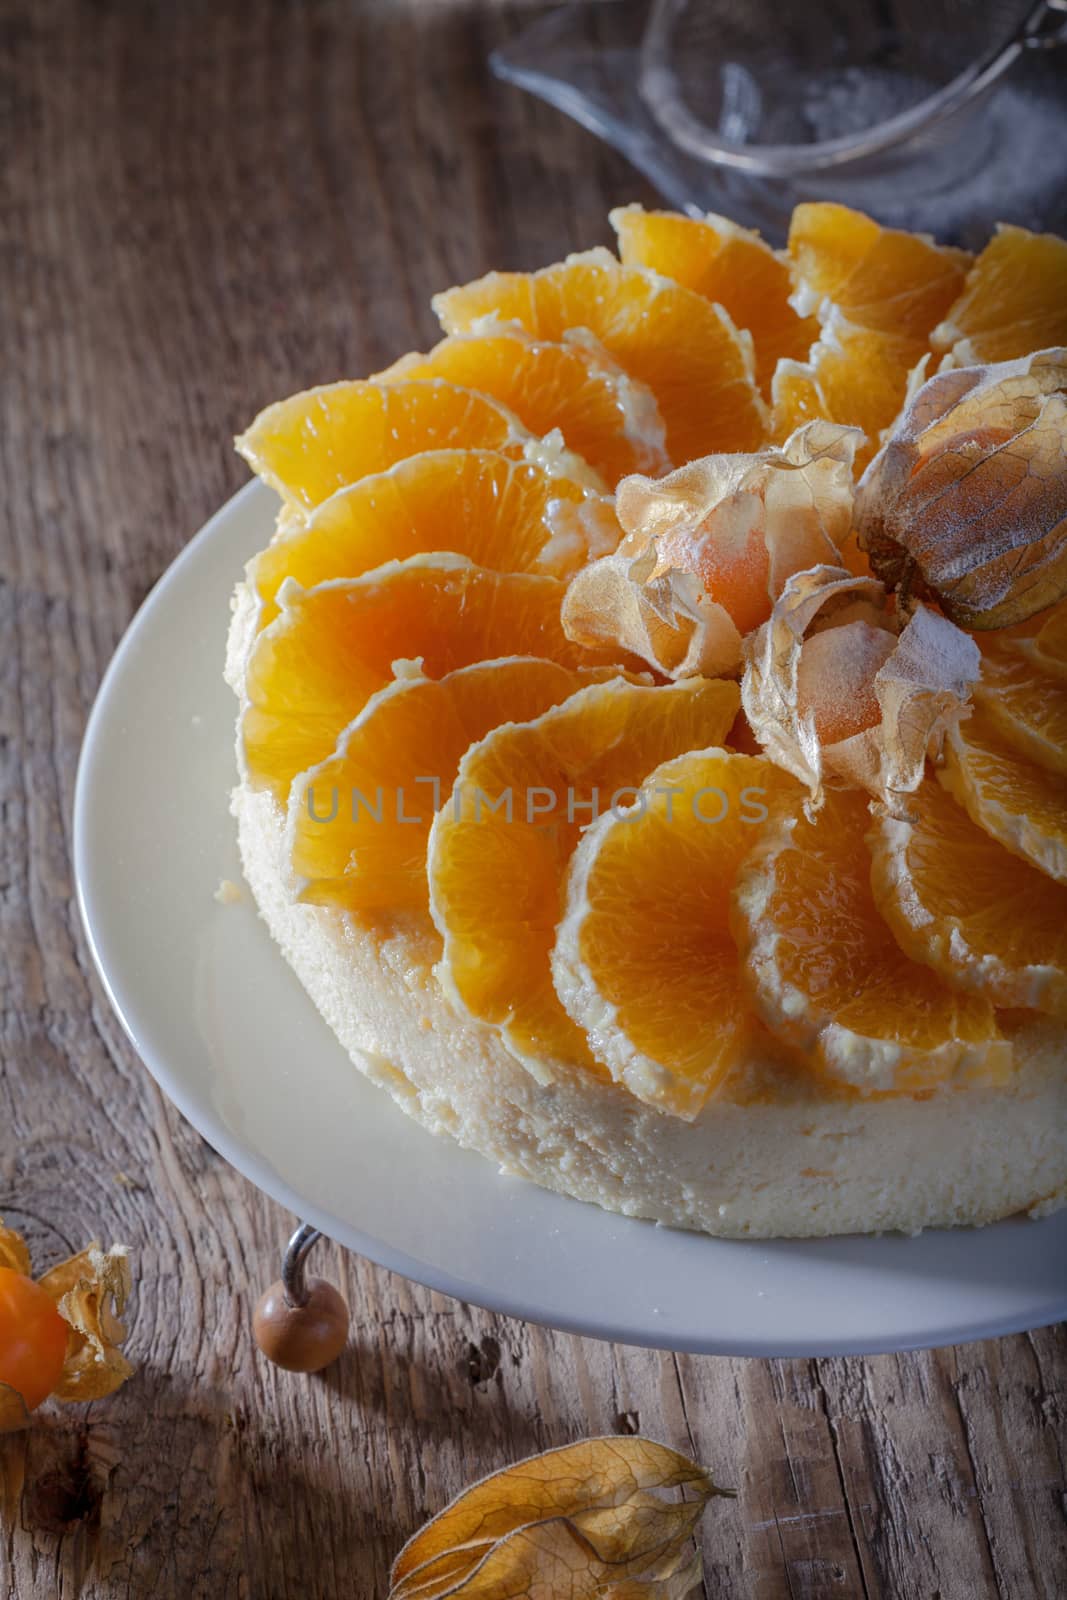 Cheesecake decorated with oranges and physalis on a